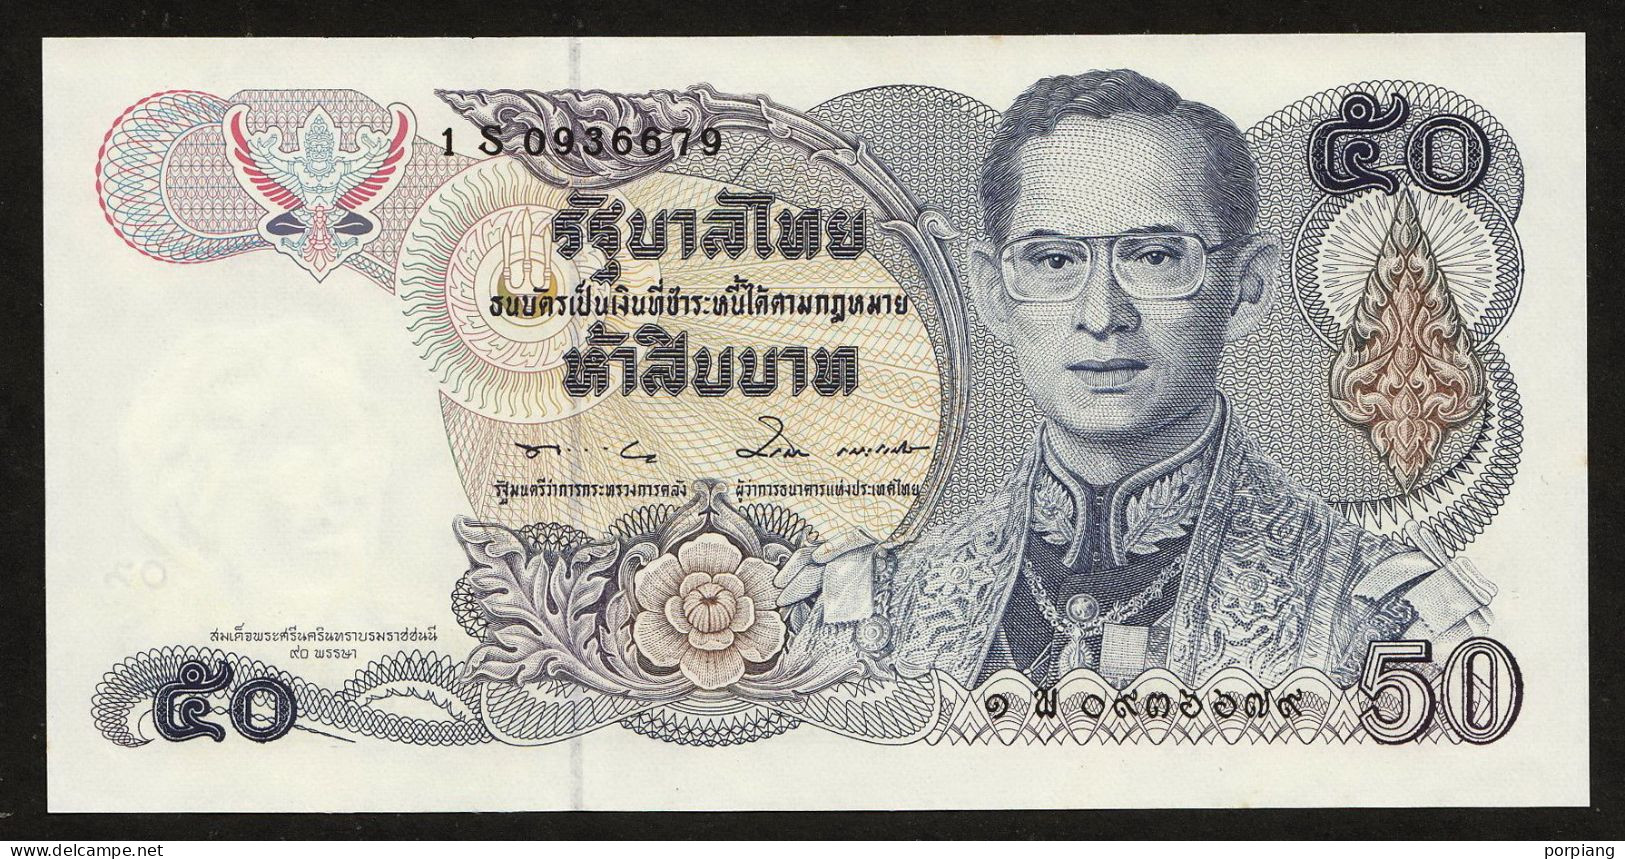 50 Baht 90th Birthday Of Princess Mother Replacement 1S Thailand 1990 UNC - Thailand